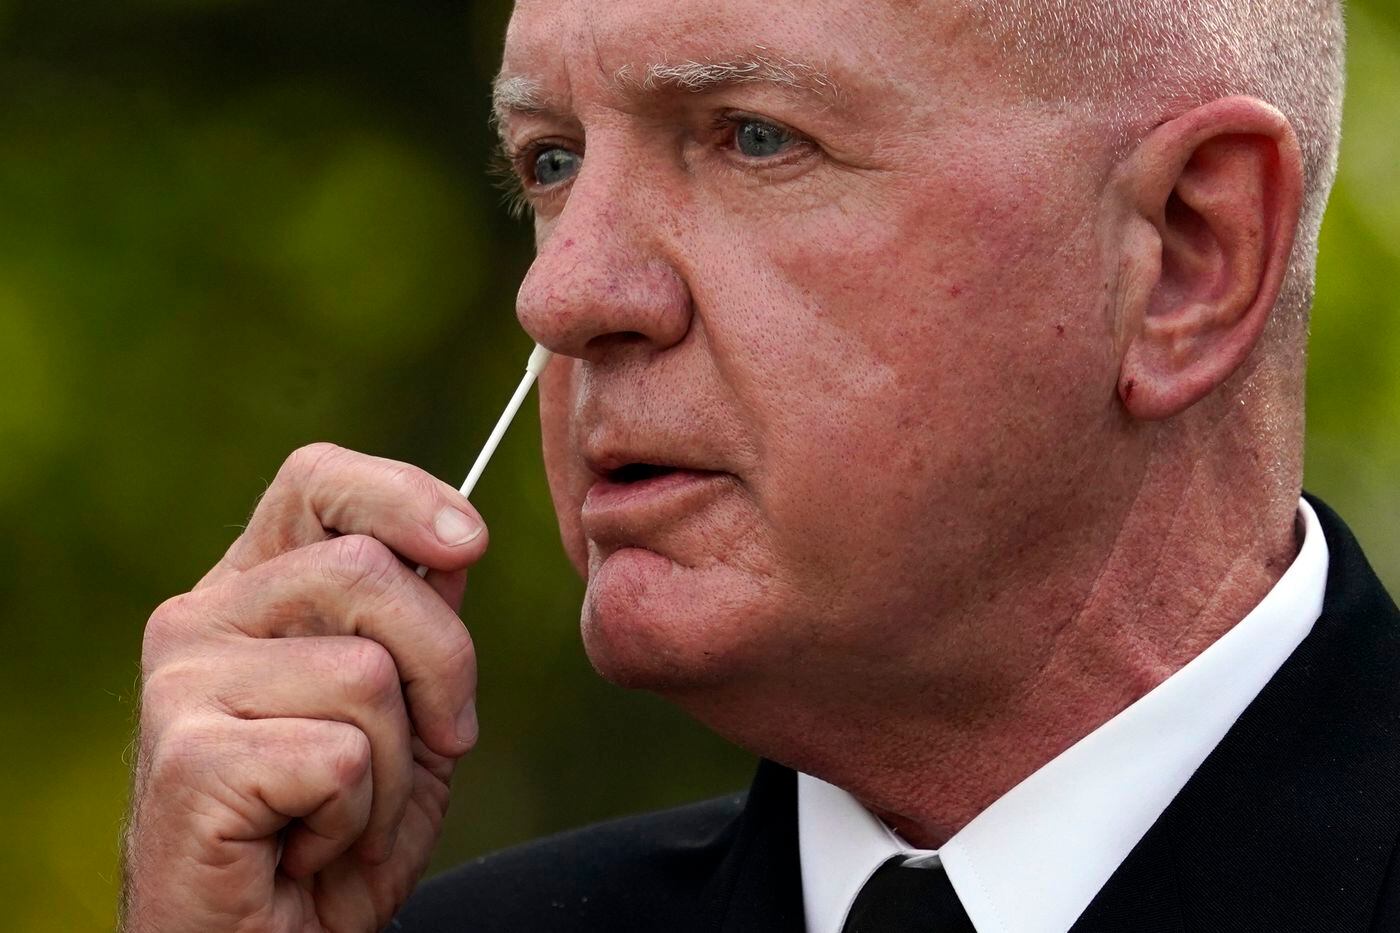 Adm. Brett Giroir, assistant secretary of Health and Human Services, swabs his nose as he demonstrates a new fast result COVID-19 antigen test during an event with President Donald Trump at the White House on Monday. (AP Photo/Evan Vucci)Evan Vucci / AP